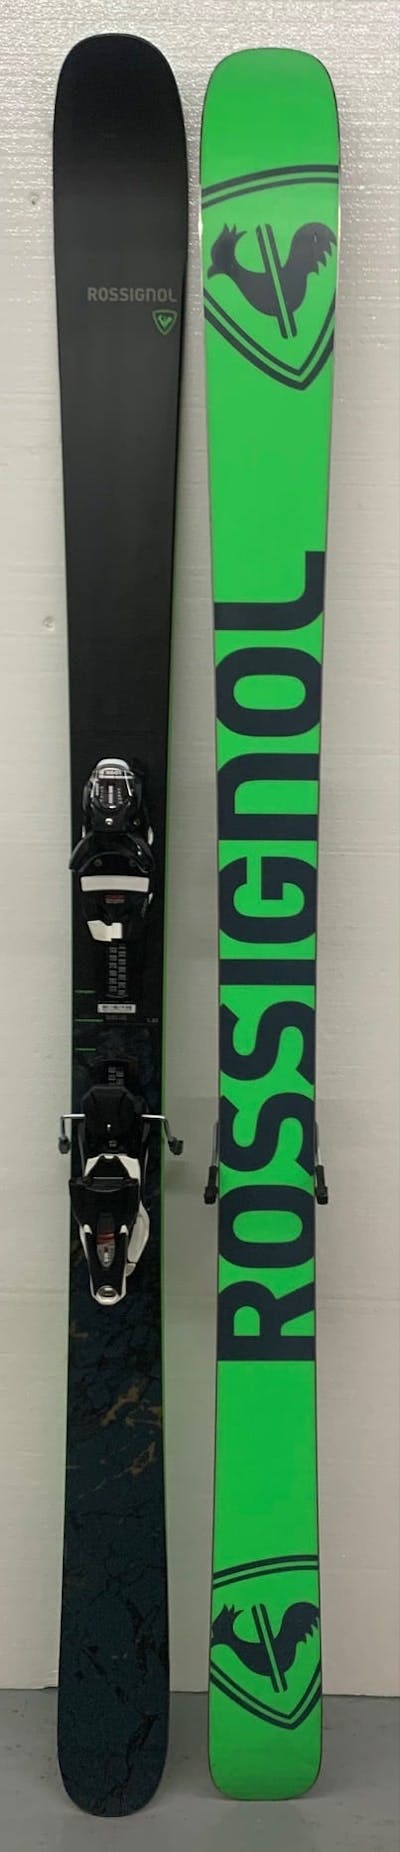 The Rossignol Black Ops Holy Shred Skis.